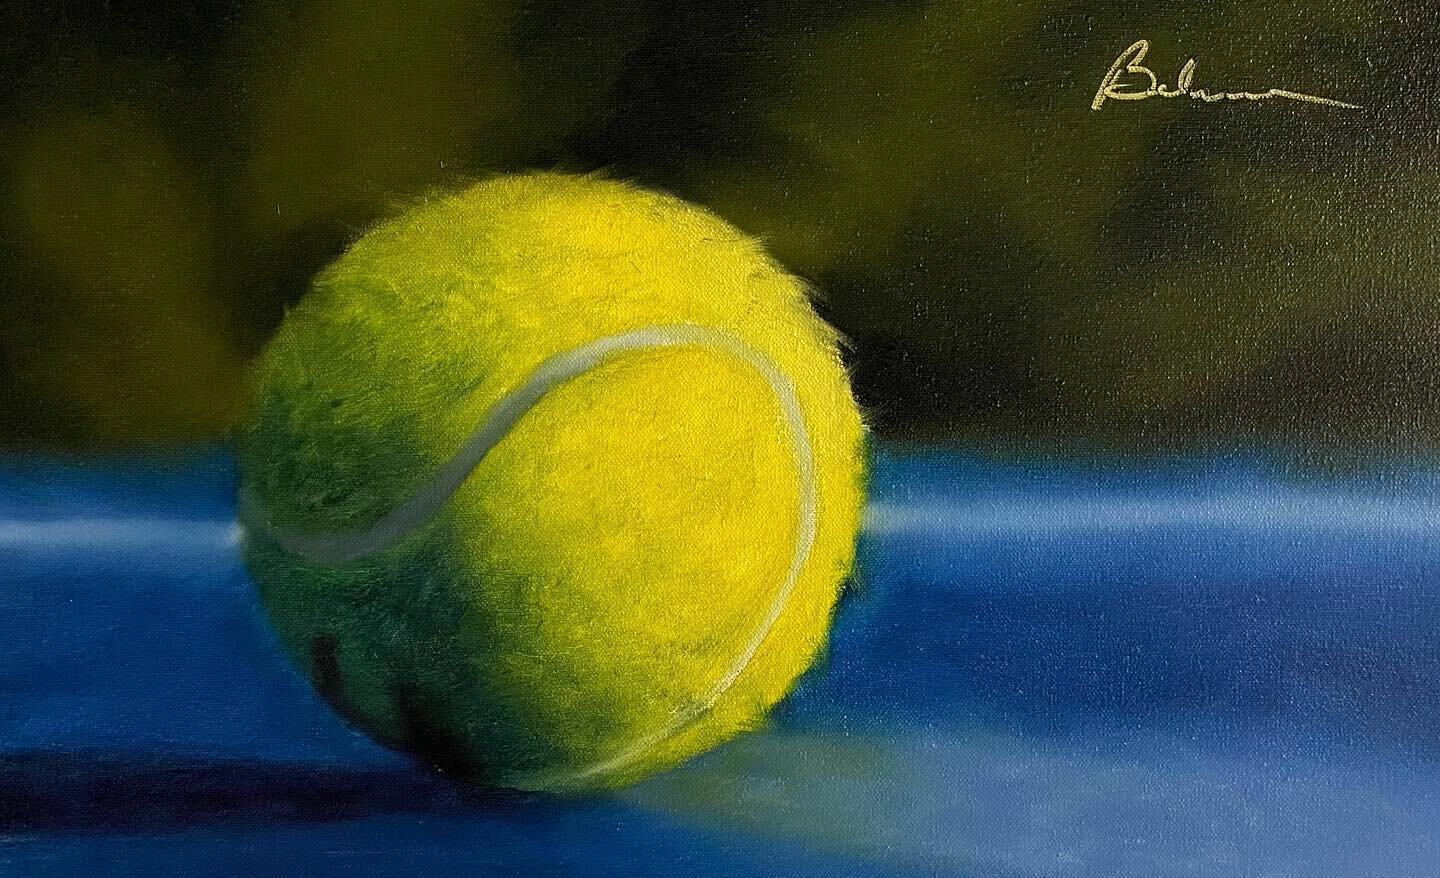 Tennis anyone? One hour demo painting done for a new student at The Warehouse Studios. It was so much fun to do! TWS these days is safety first...followed closely by inspiration and creativity. 
😷👍

Join us
Live Creatively!
🎨😀